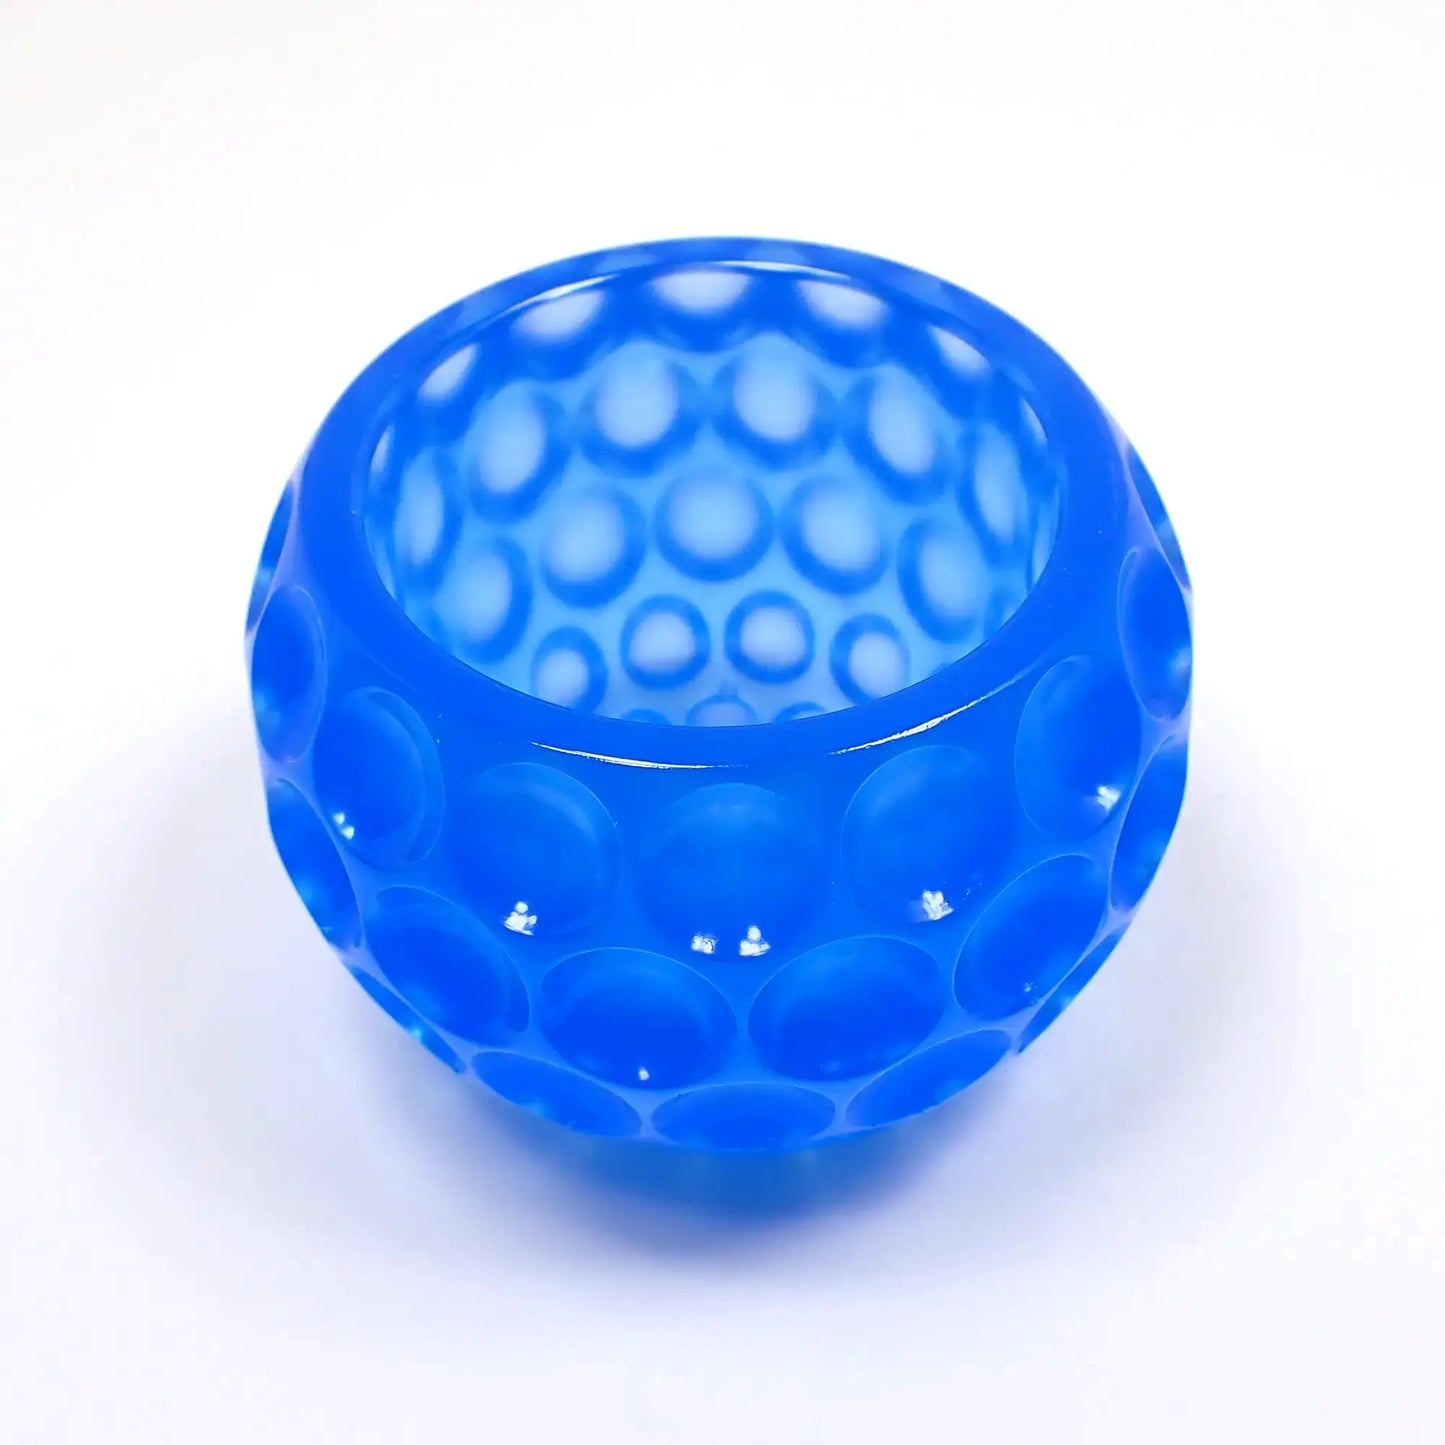 Small Handmade Round Neon Blue Resin Succulent Pot with Indented Dot Pattern